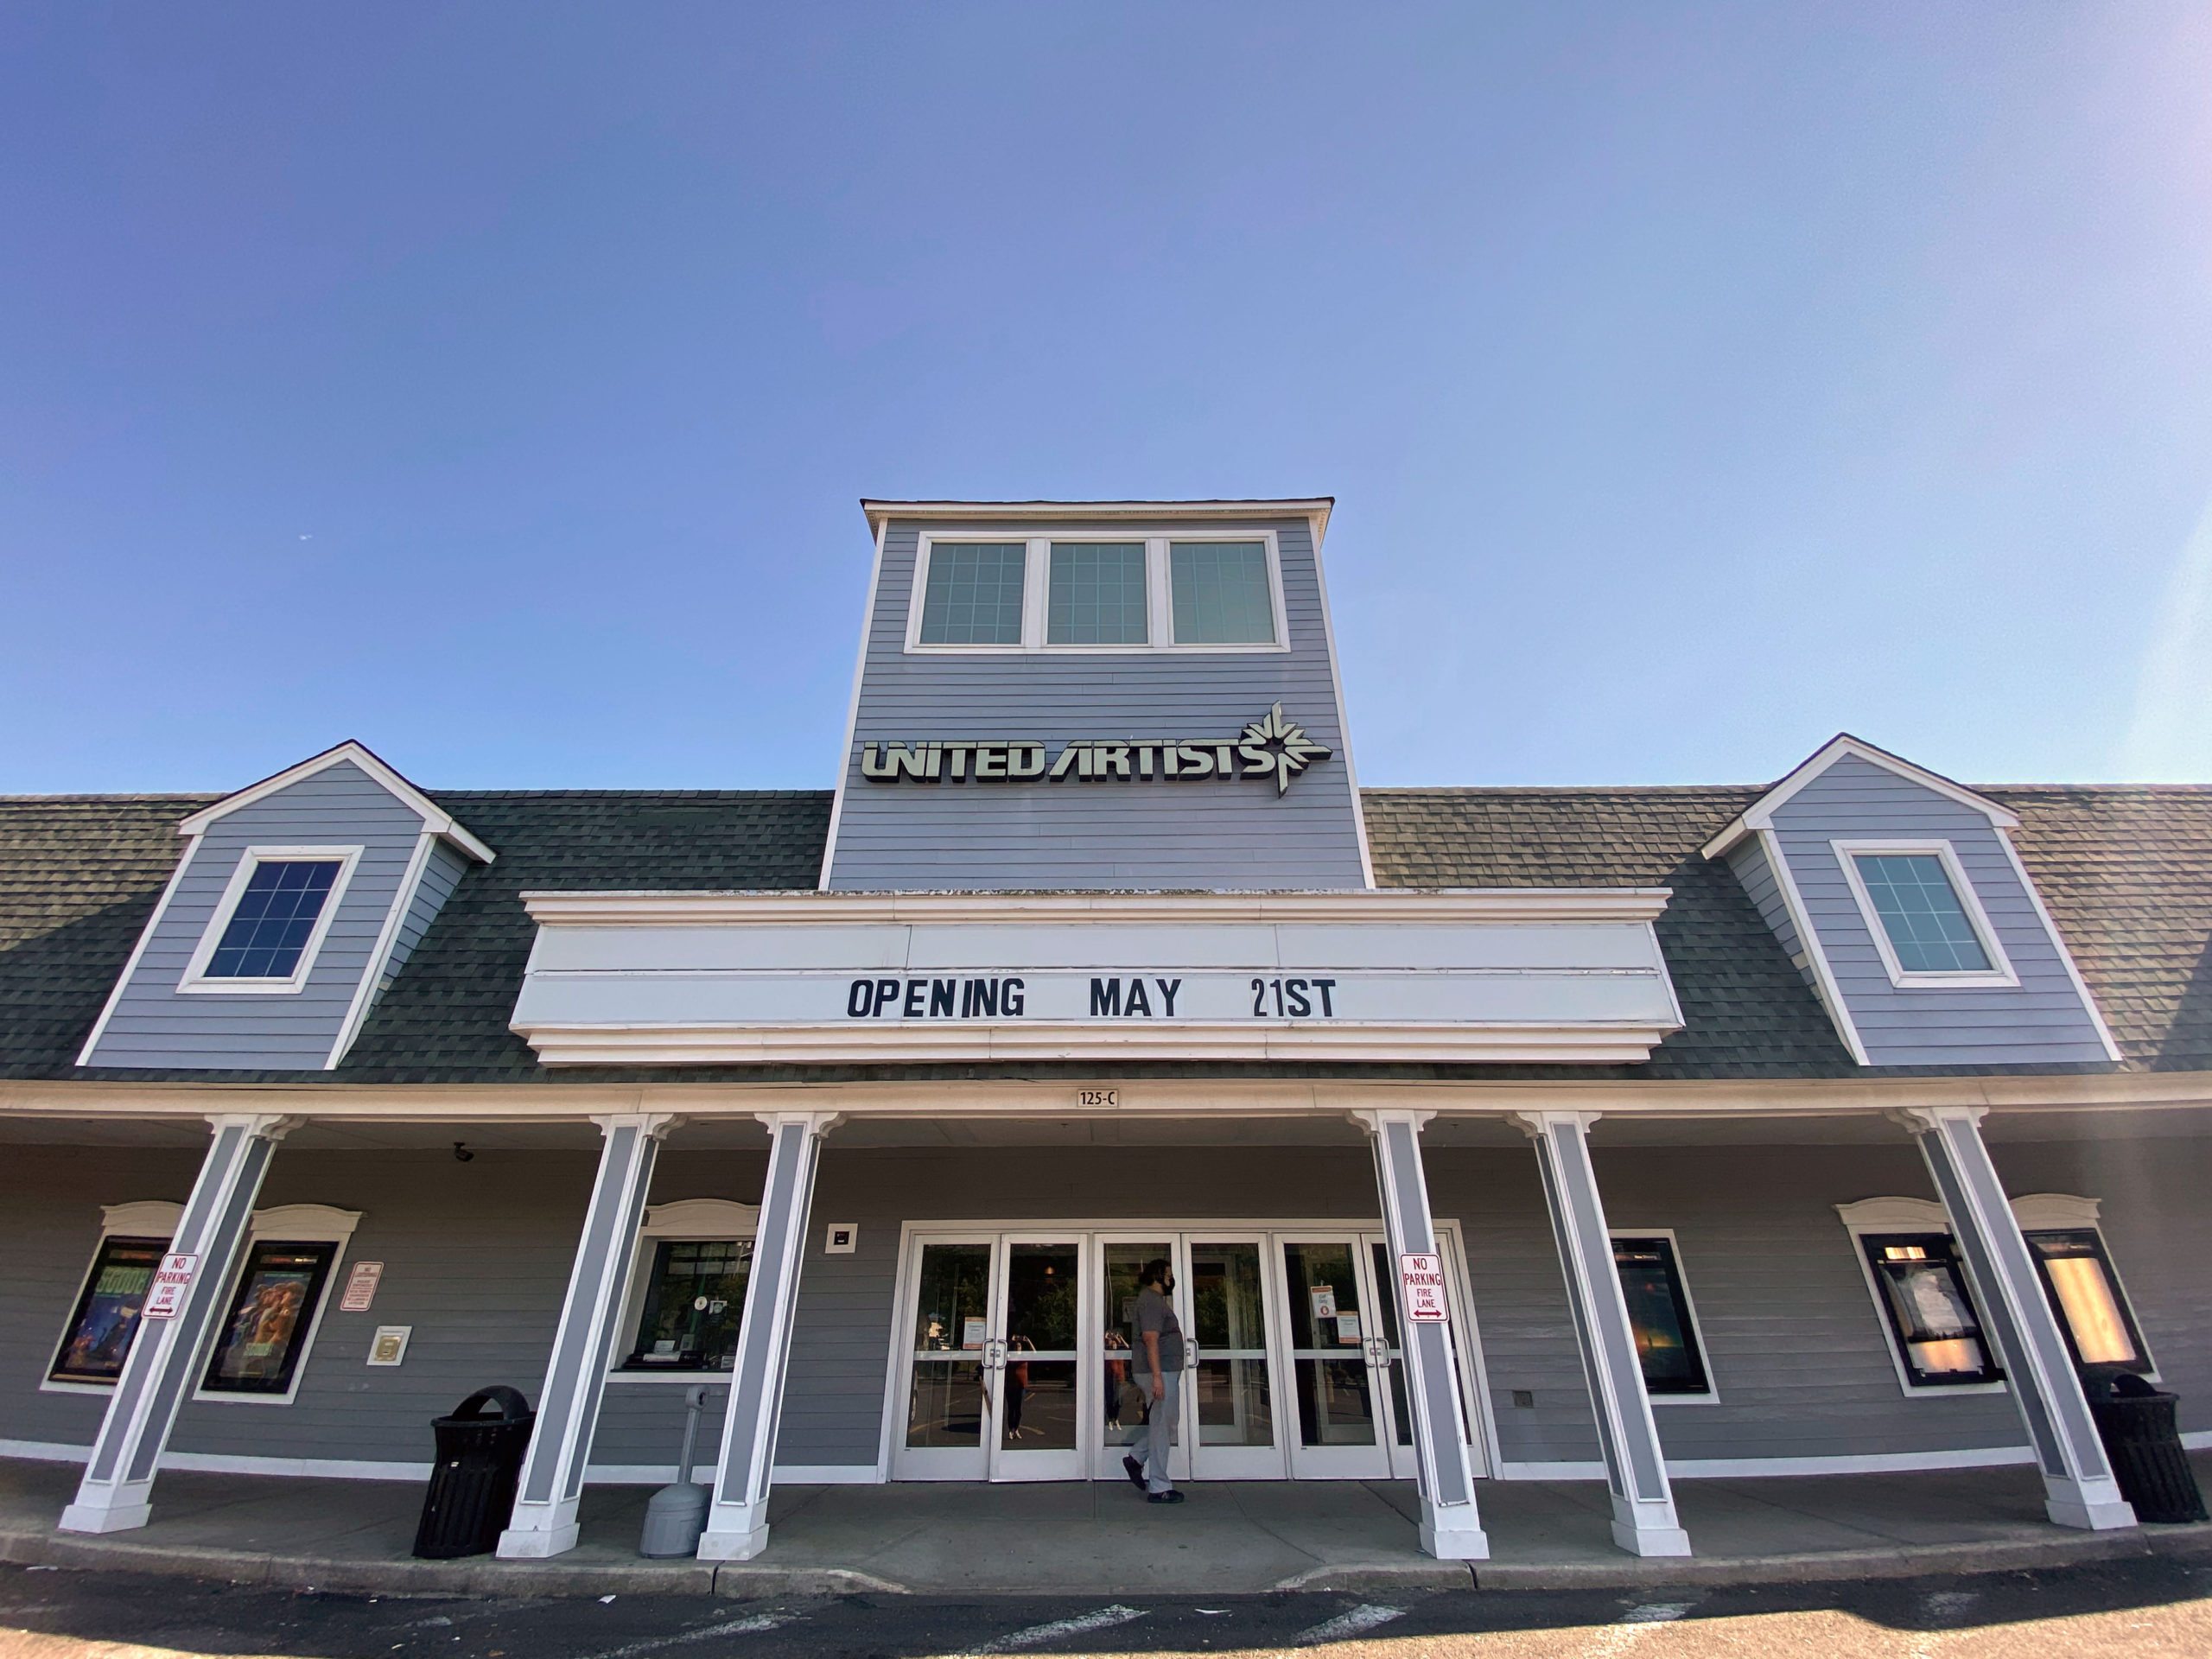 Hampton Bays Movie Theater To Reopen May 21 Southampton Still In Limbo - 27 East